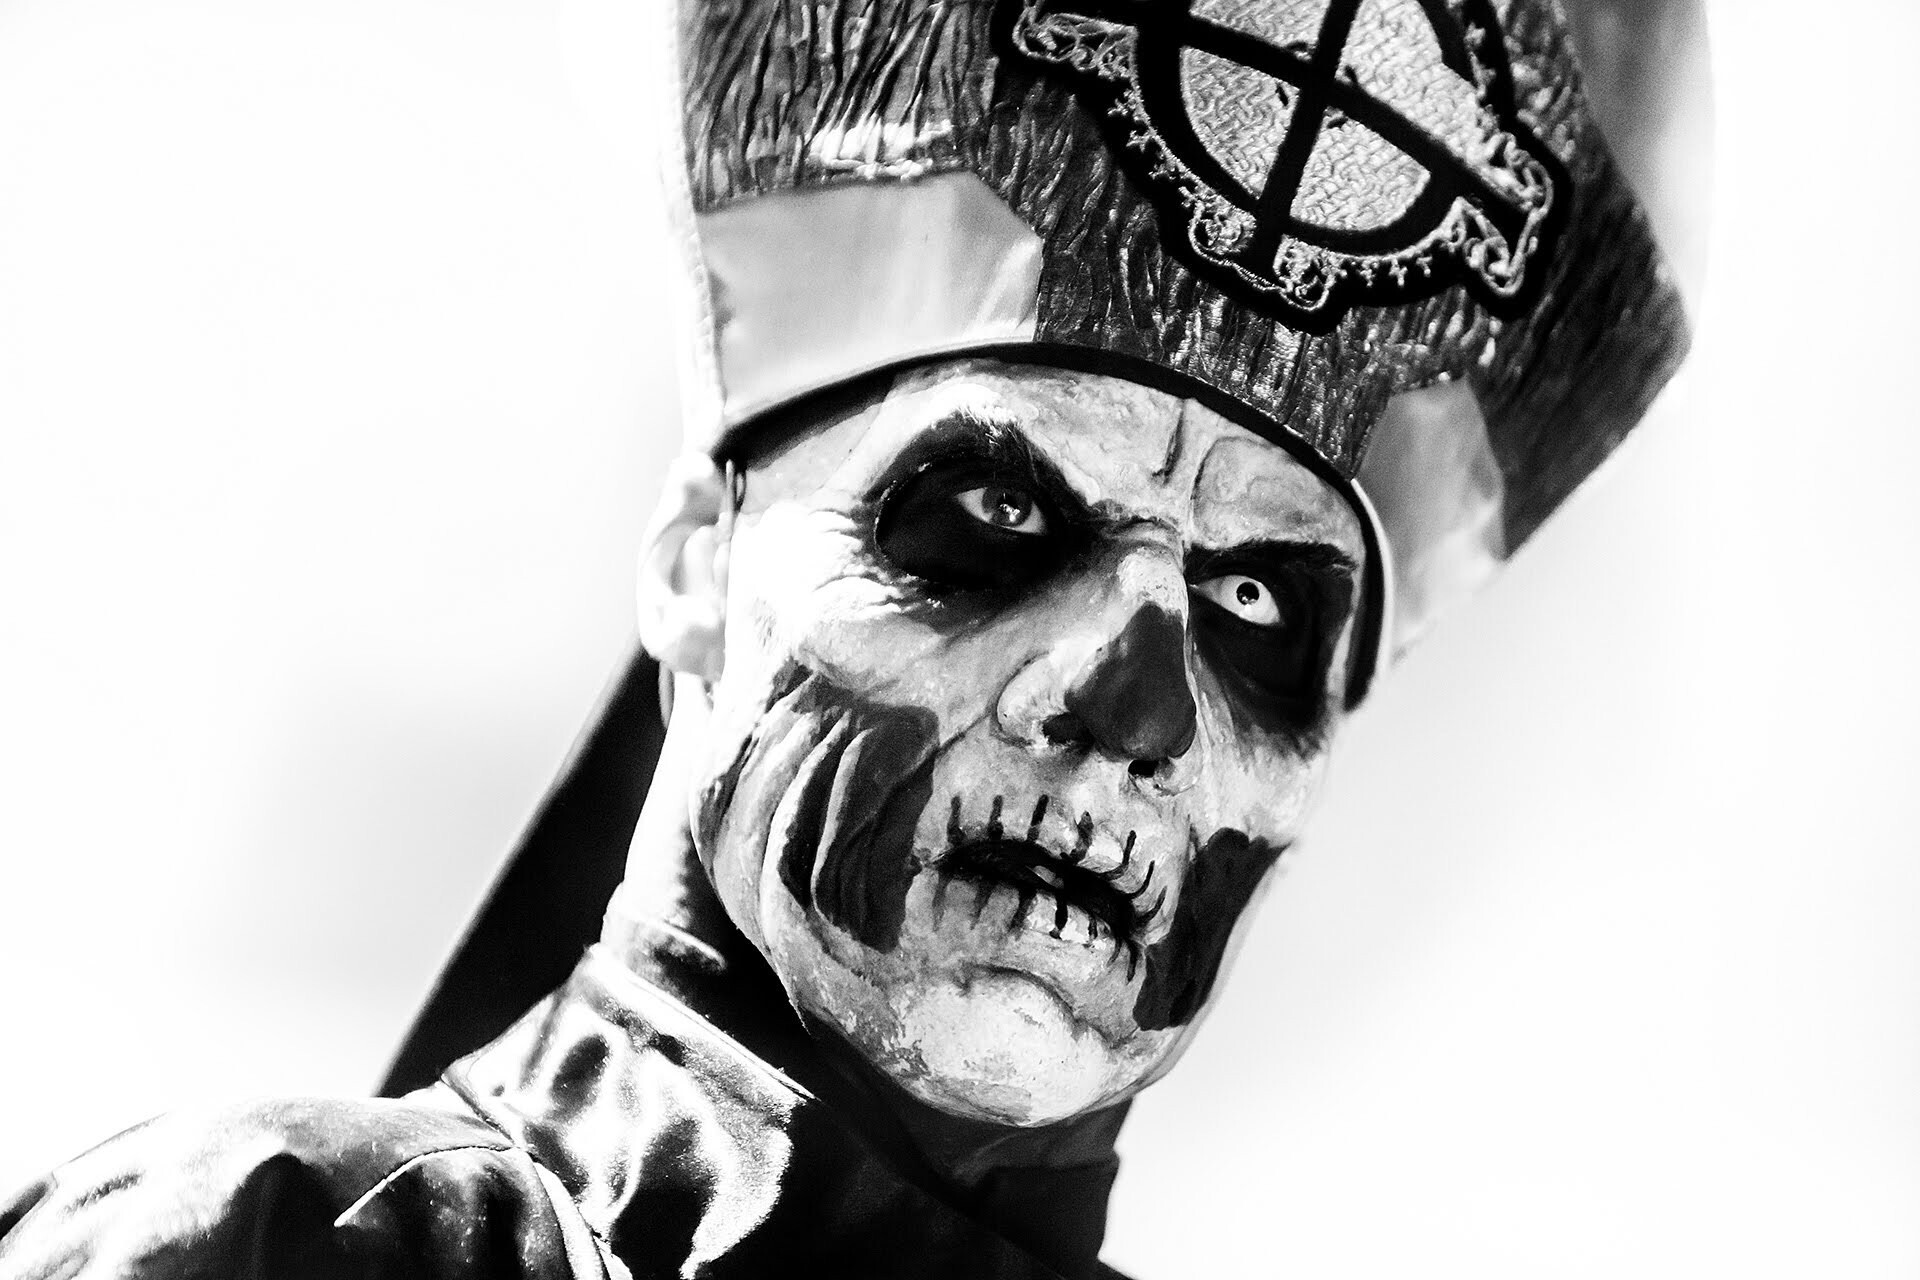 Ghost (Band): Papa Emeritus, "Cirice" was released on May 30, 2015. 1920x1280 HD Wallpaper.